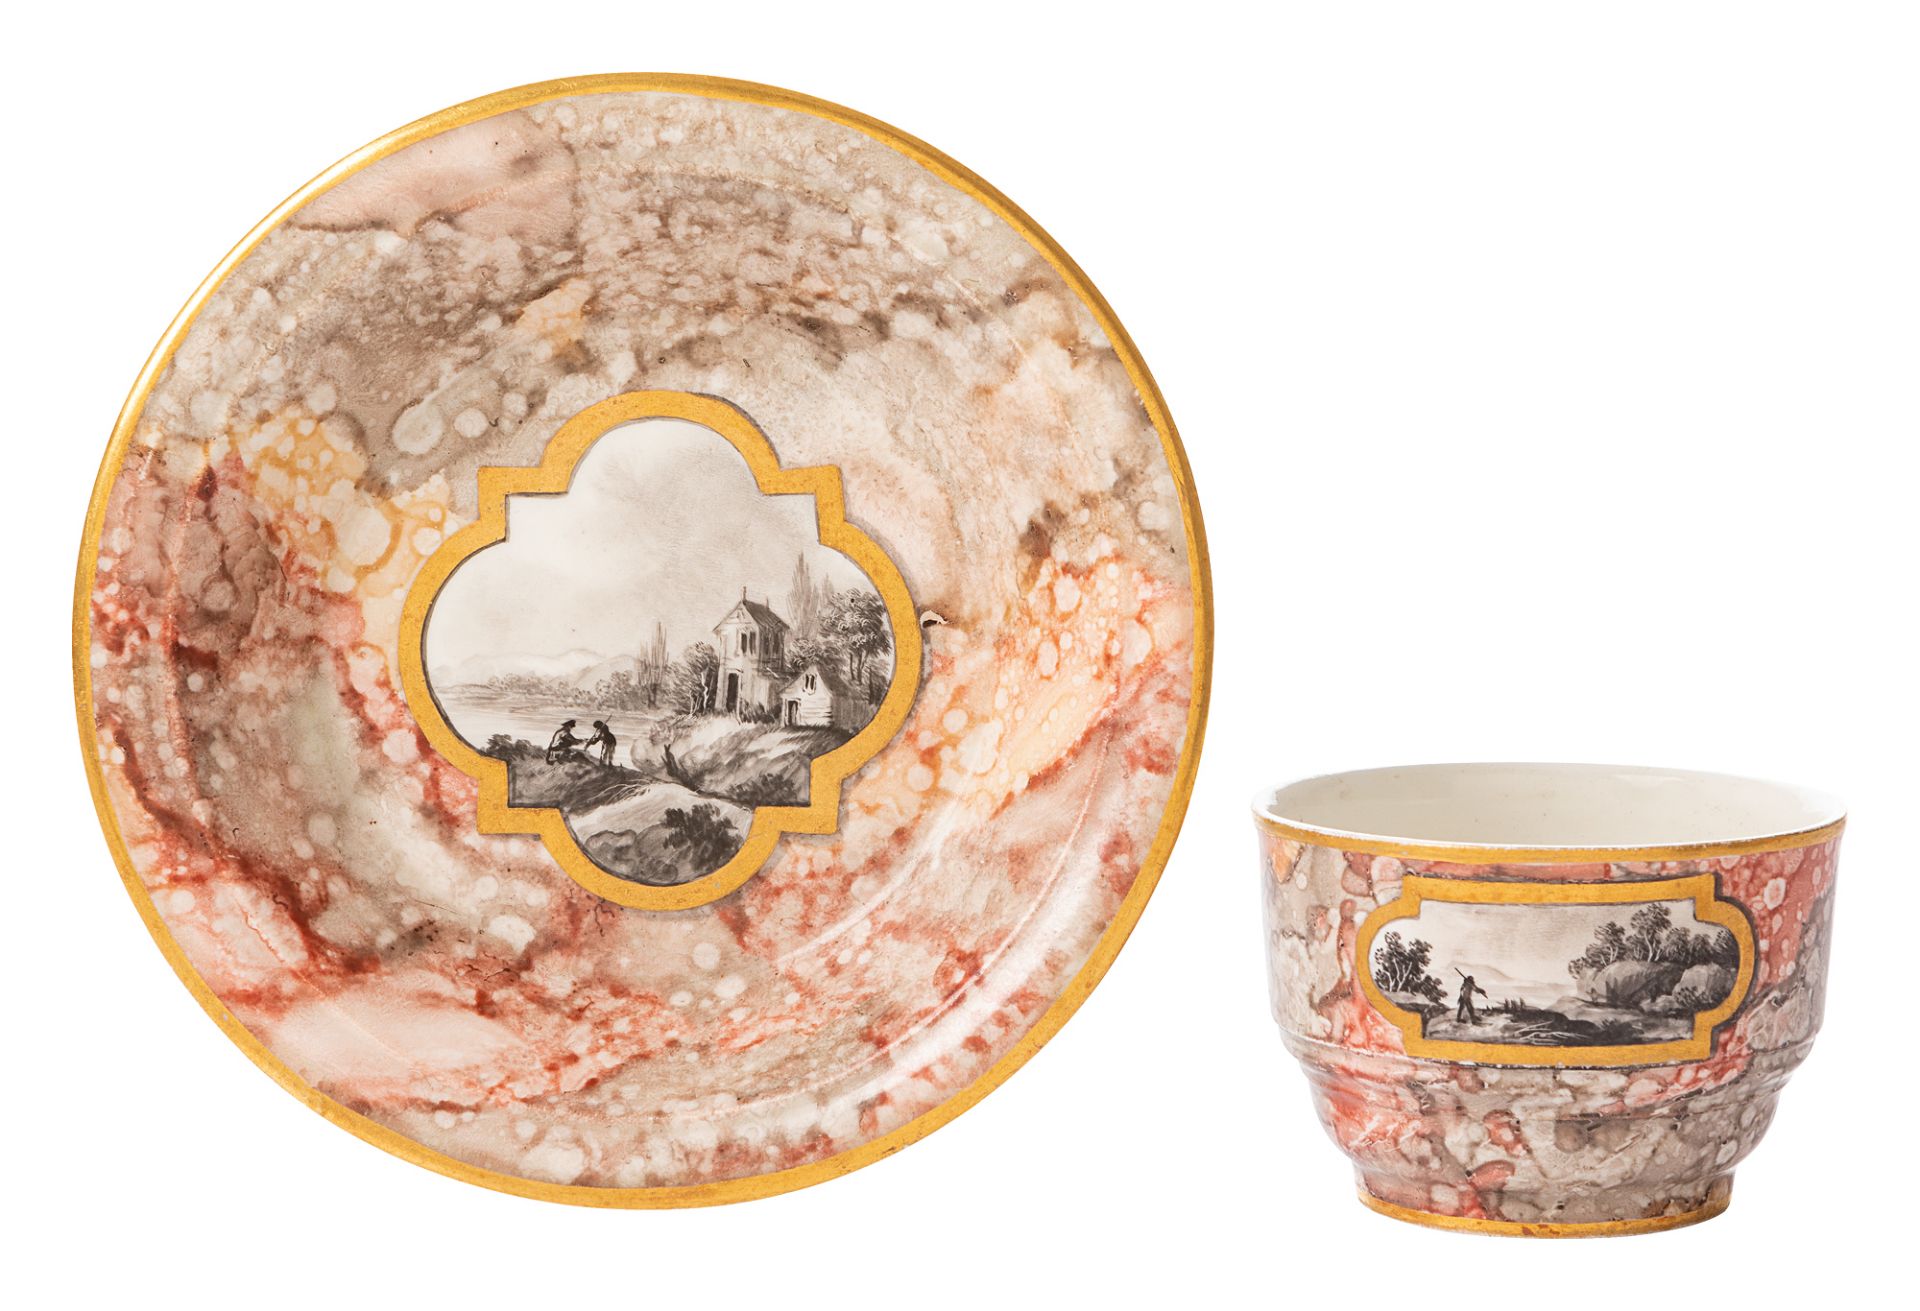 Cup and saucer with trompe-l'œil marble and landscape scenes